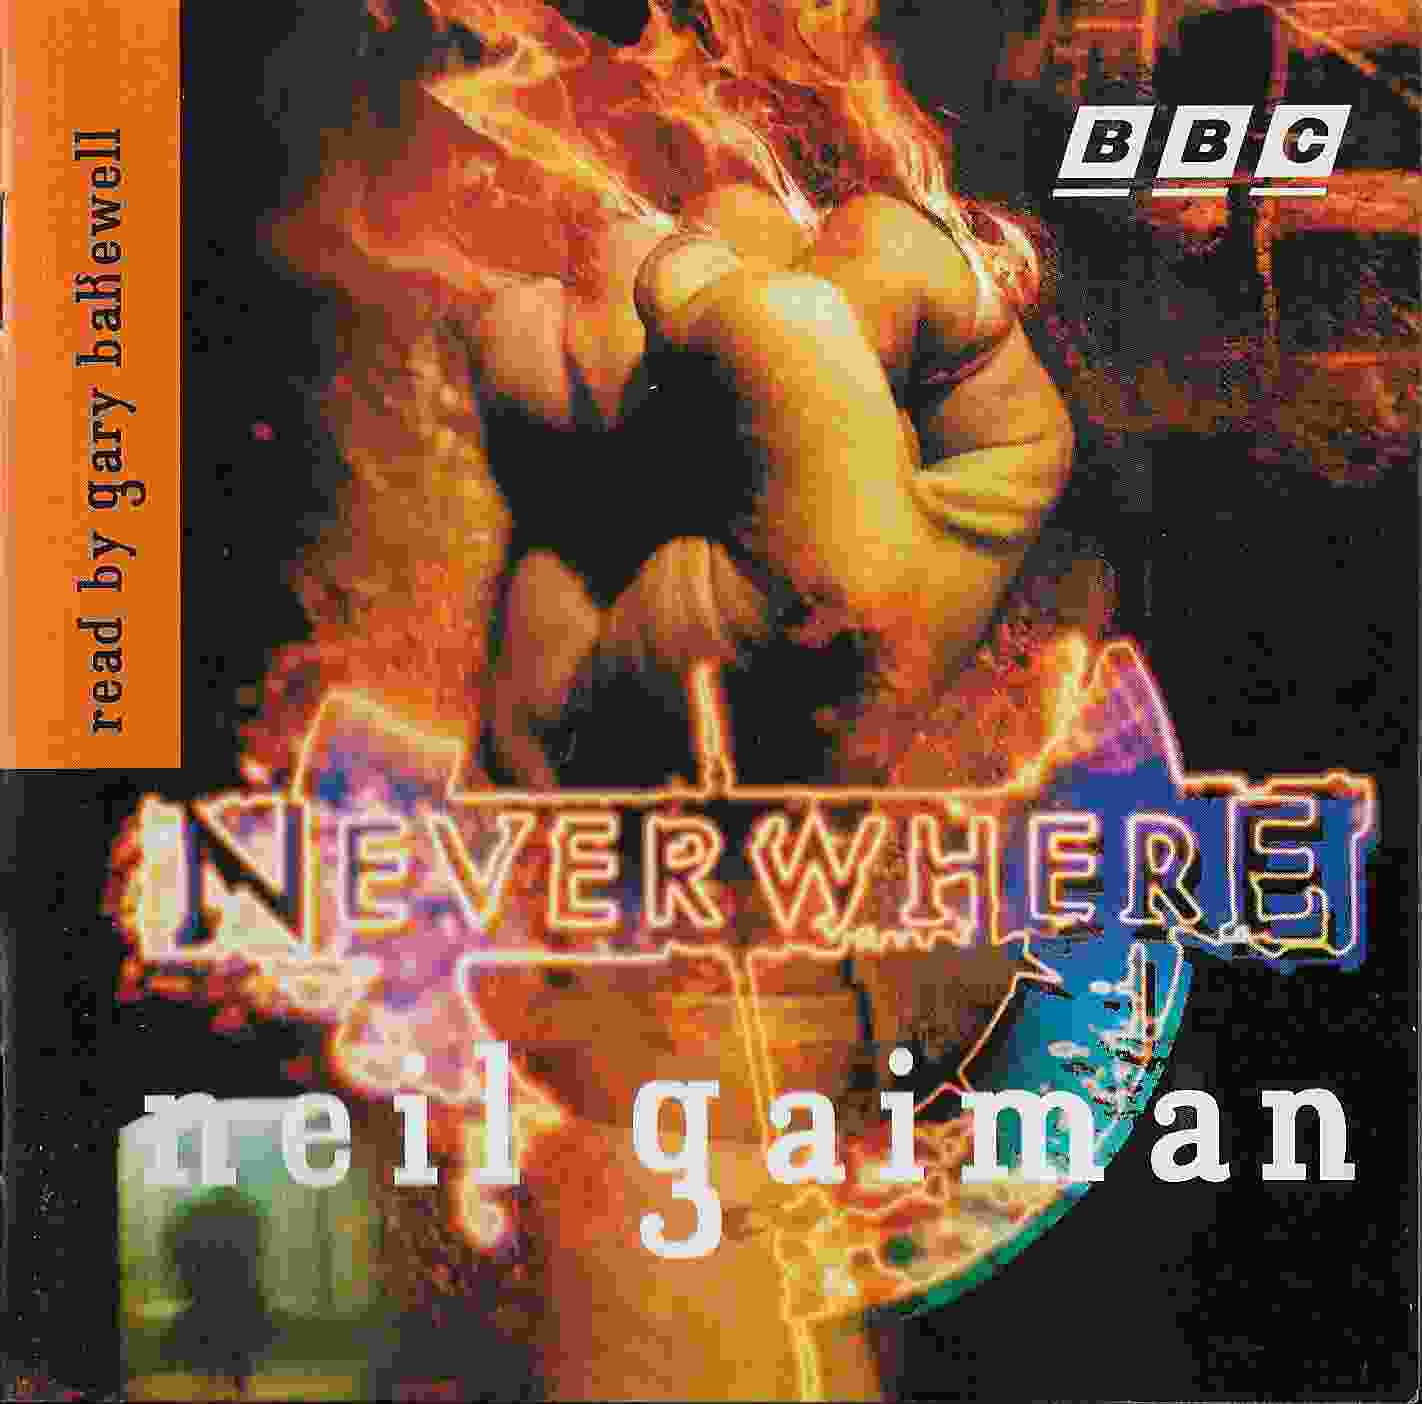 Picture of Neverwhere by artist Gary Bakewell from the BBC cds - Records and Tapes library